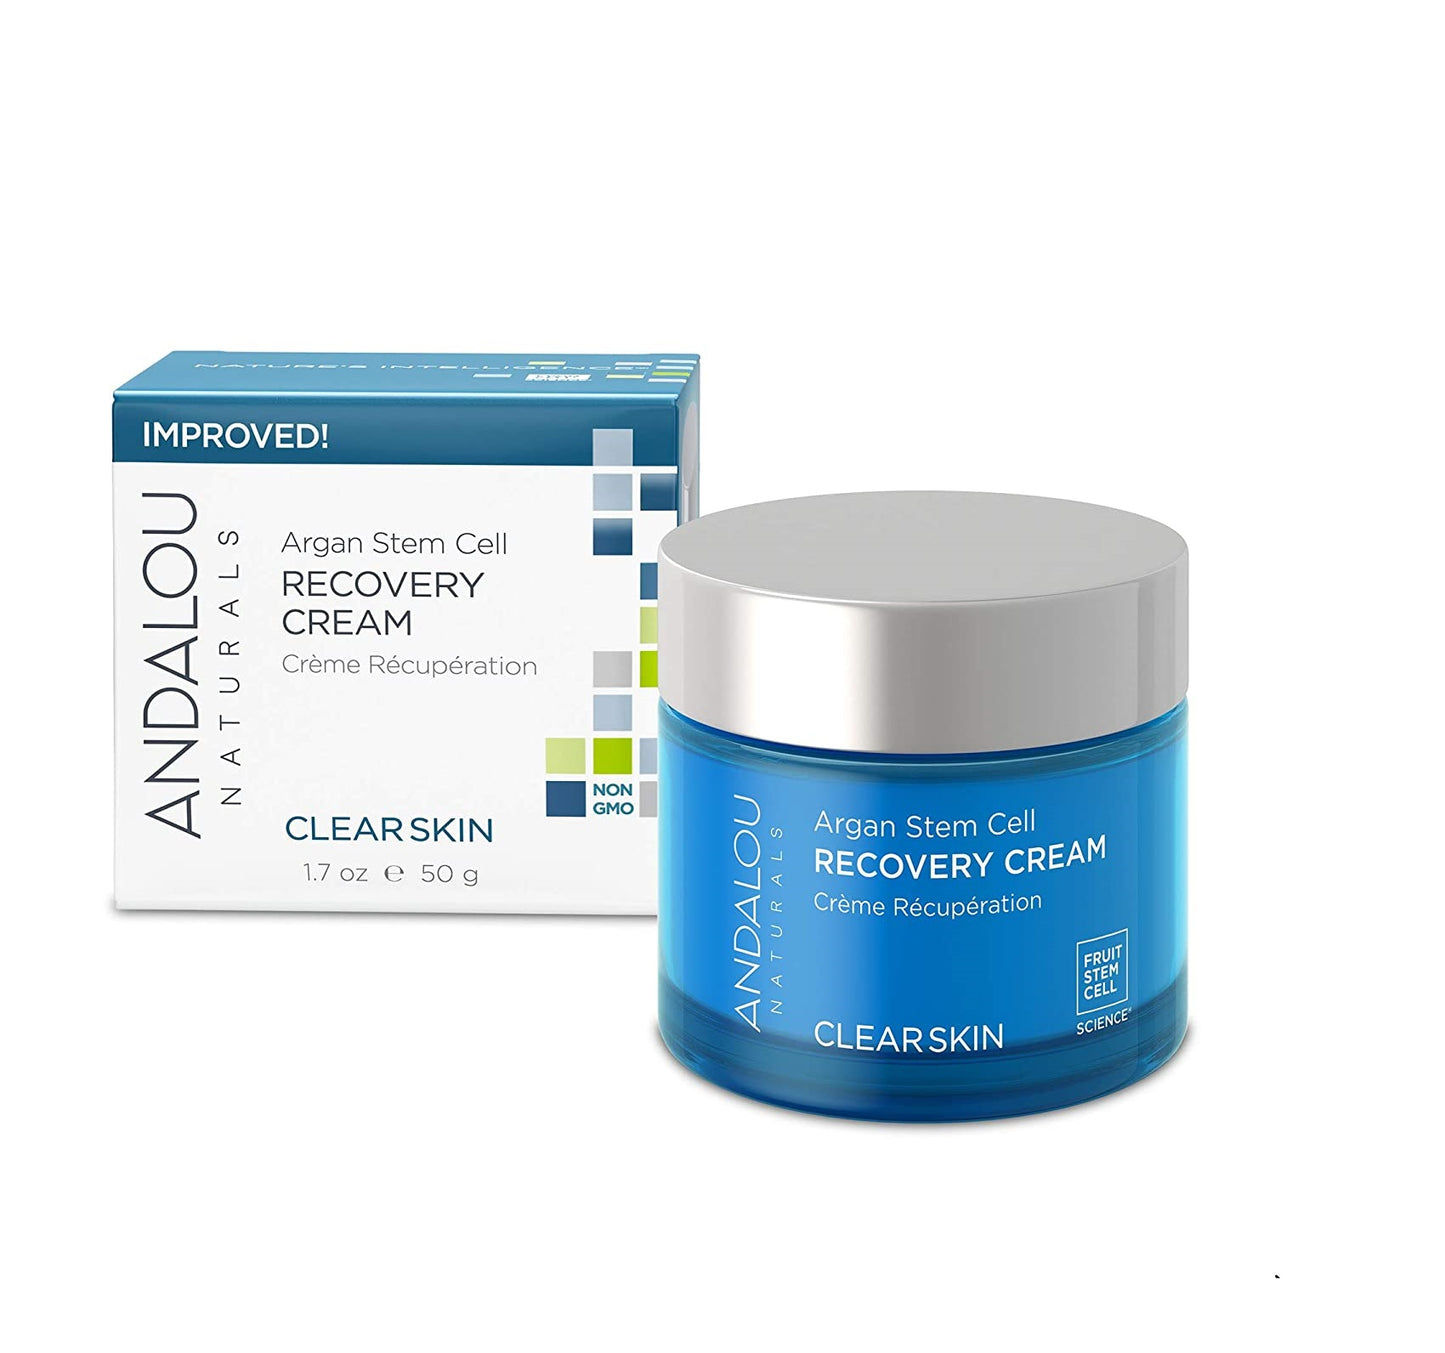 Andalou Naturals Clear Skin Argan Stem Cell Recovery Cream